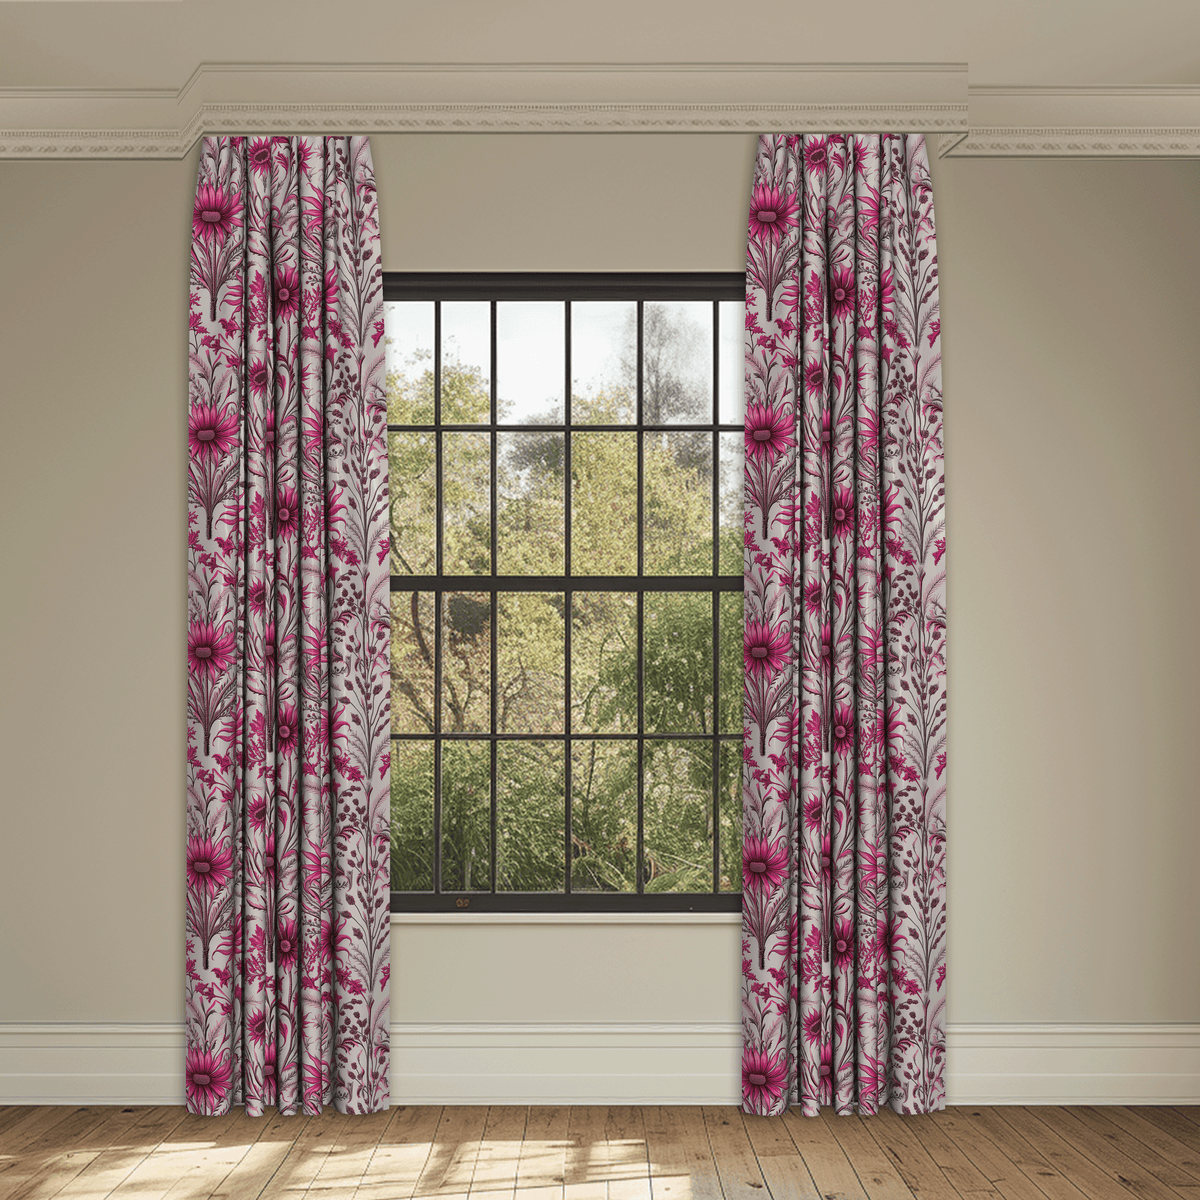 Knowing Fuchsia Made to Measure Curtains